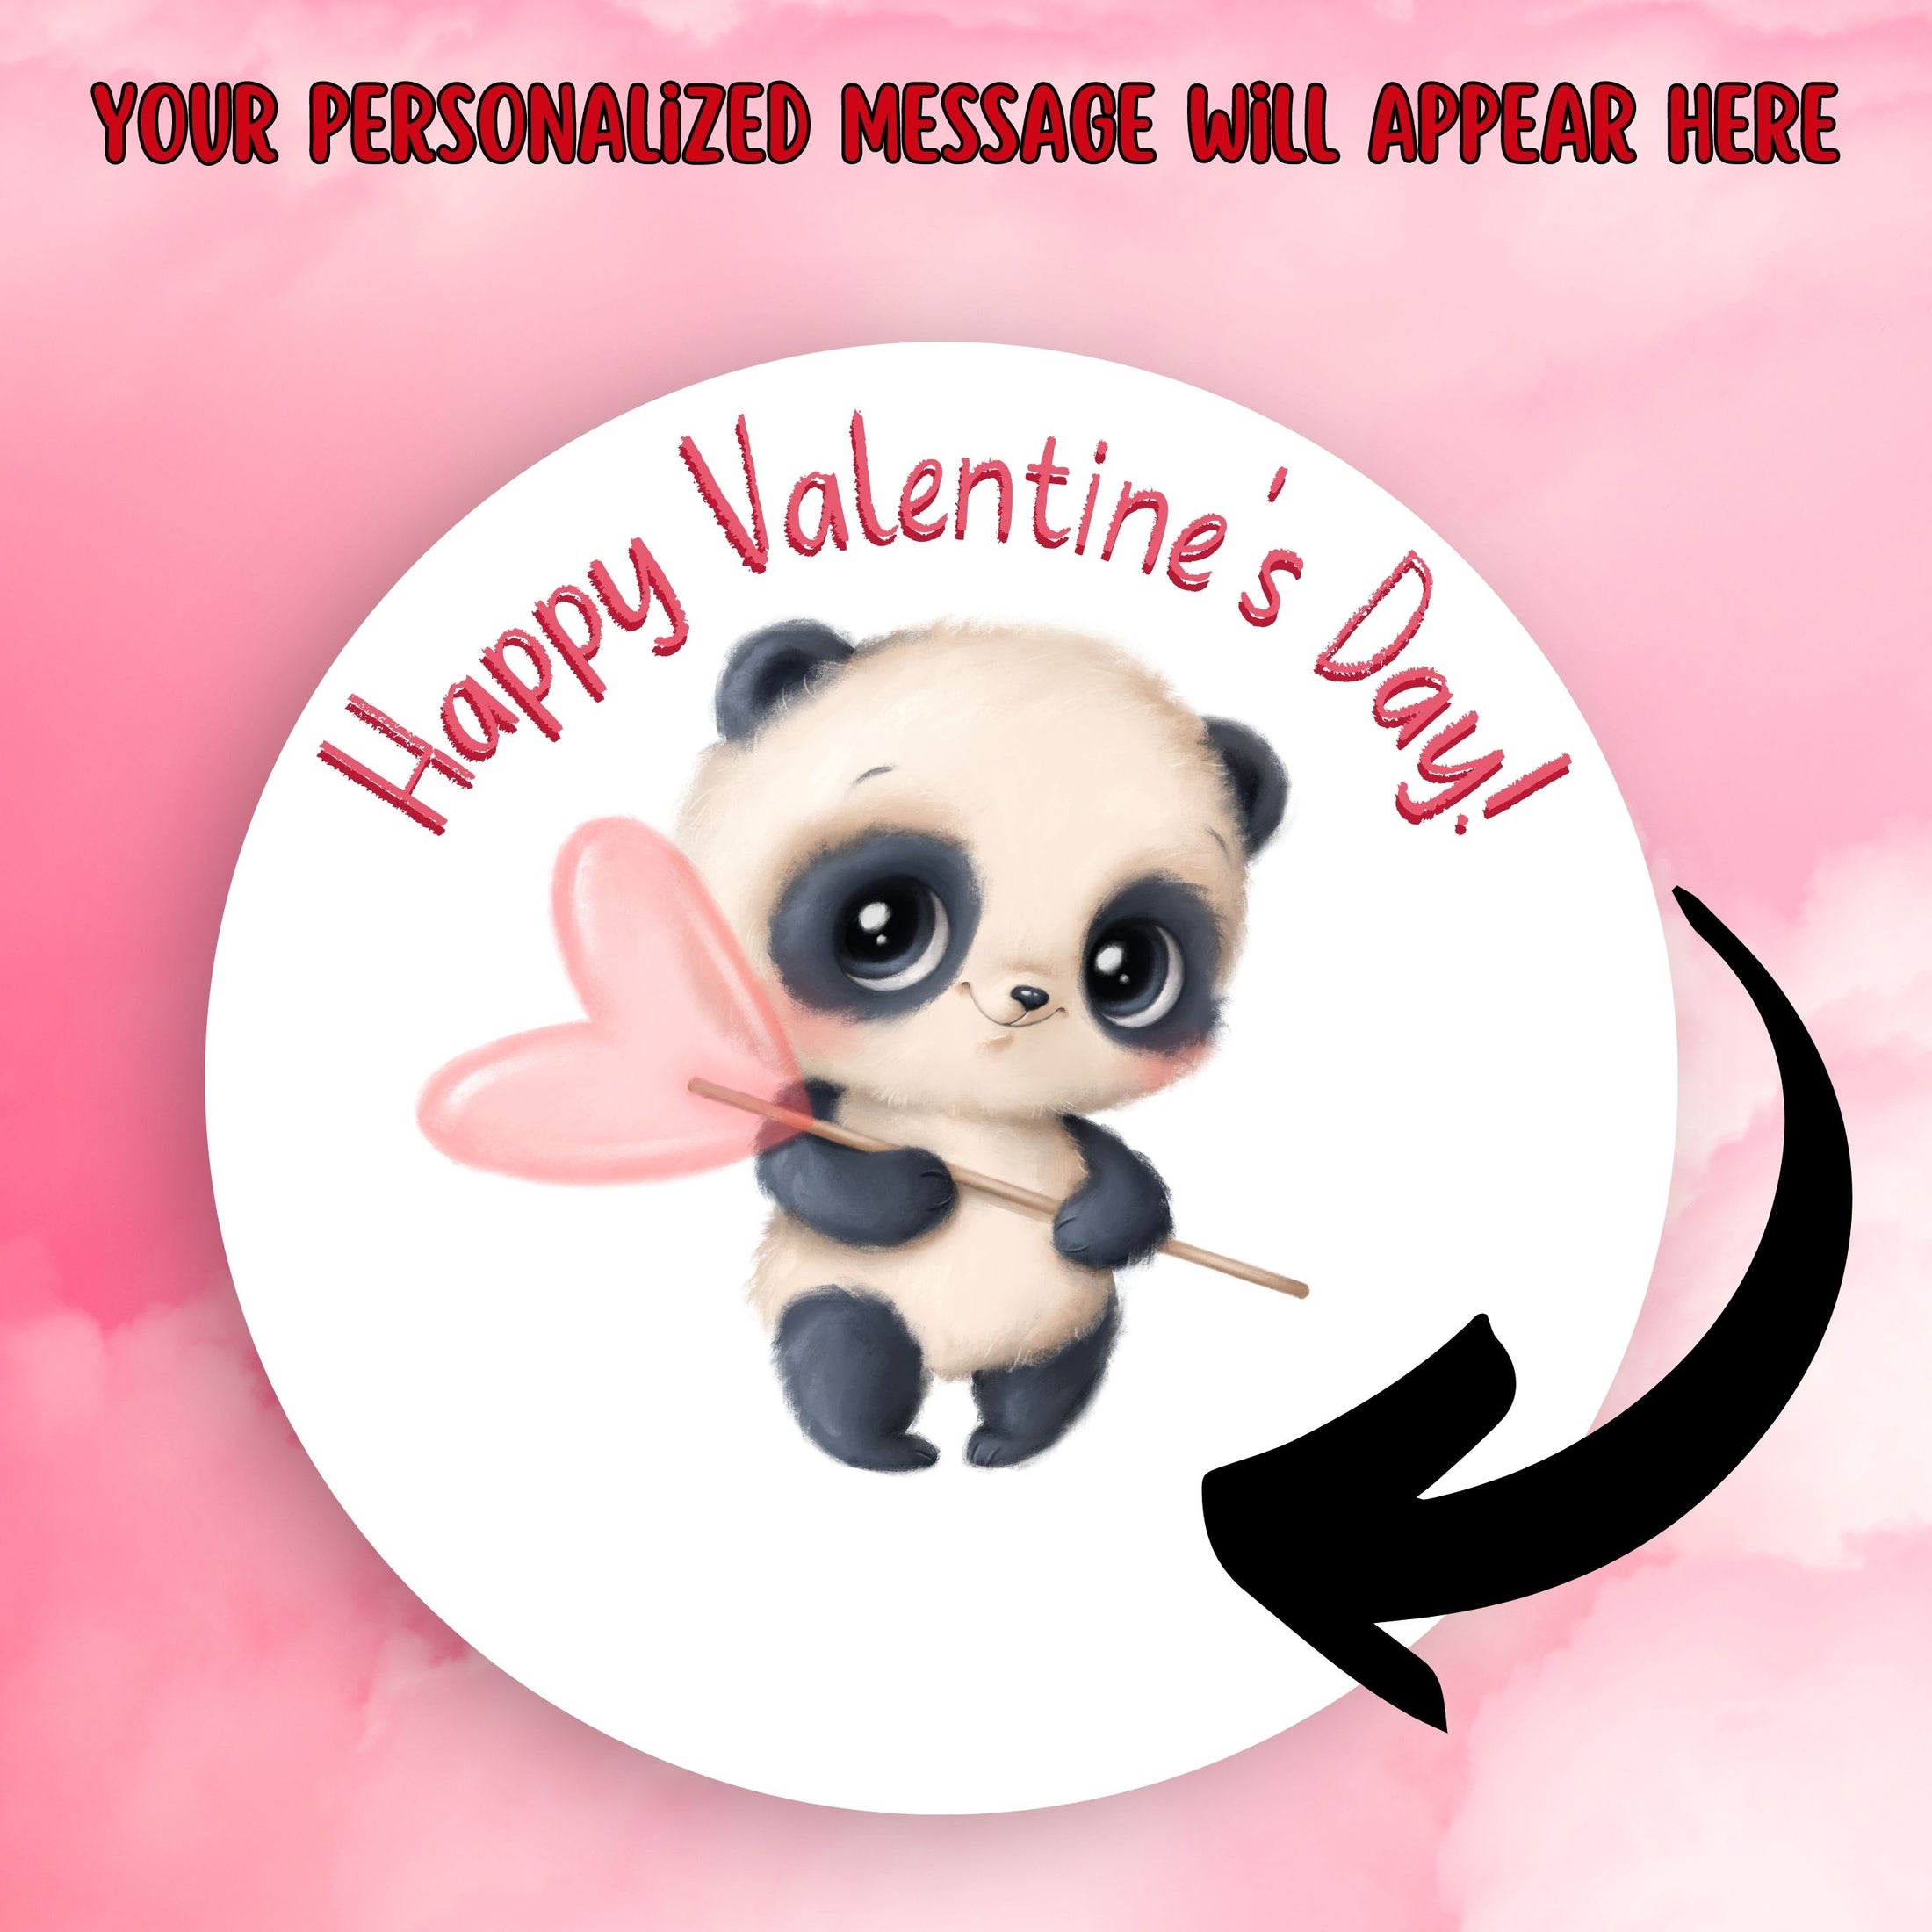 This image shows the valentine sticker with an arrow showing where your personalized message will be printed.